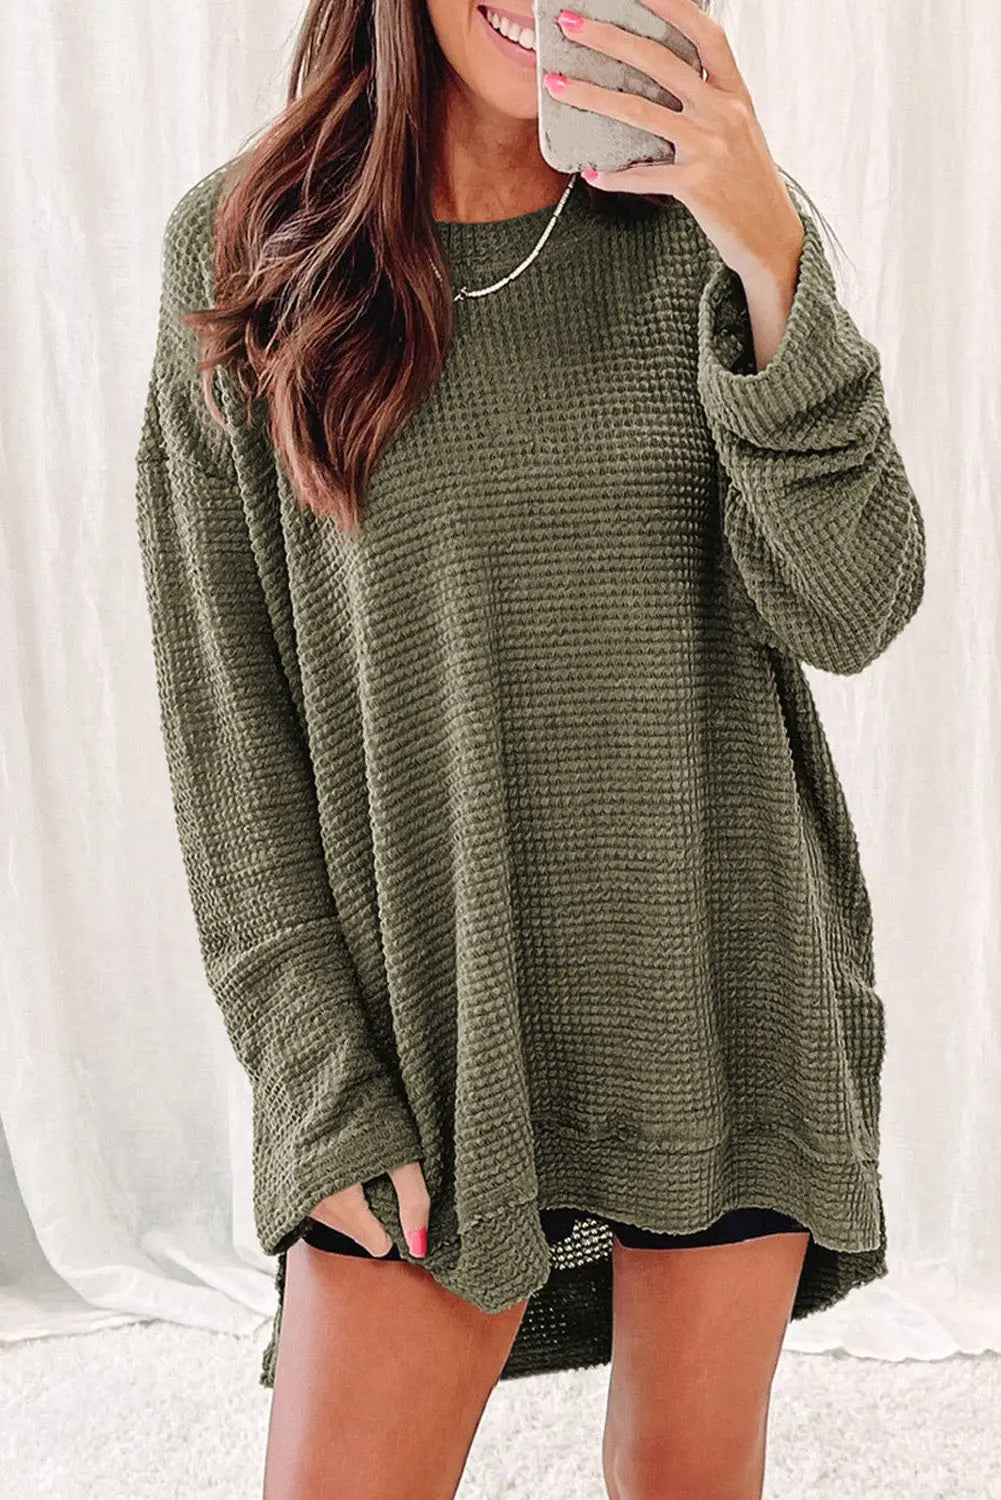 Moss green plus size textured knit long sleeve top